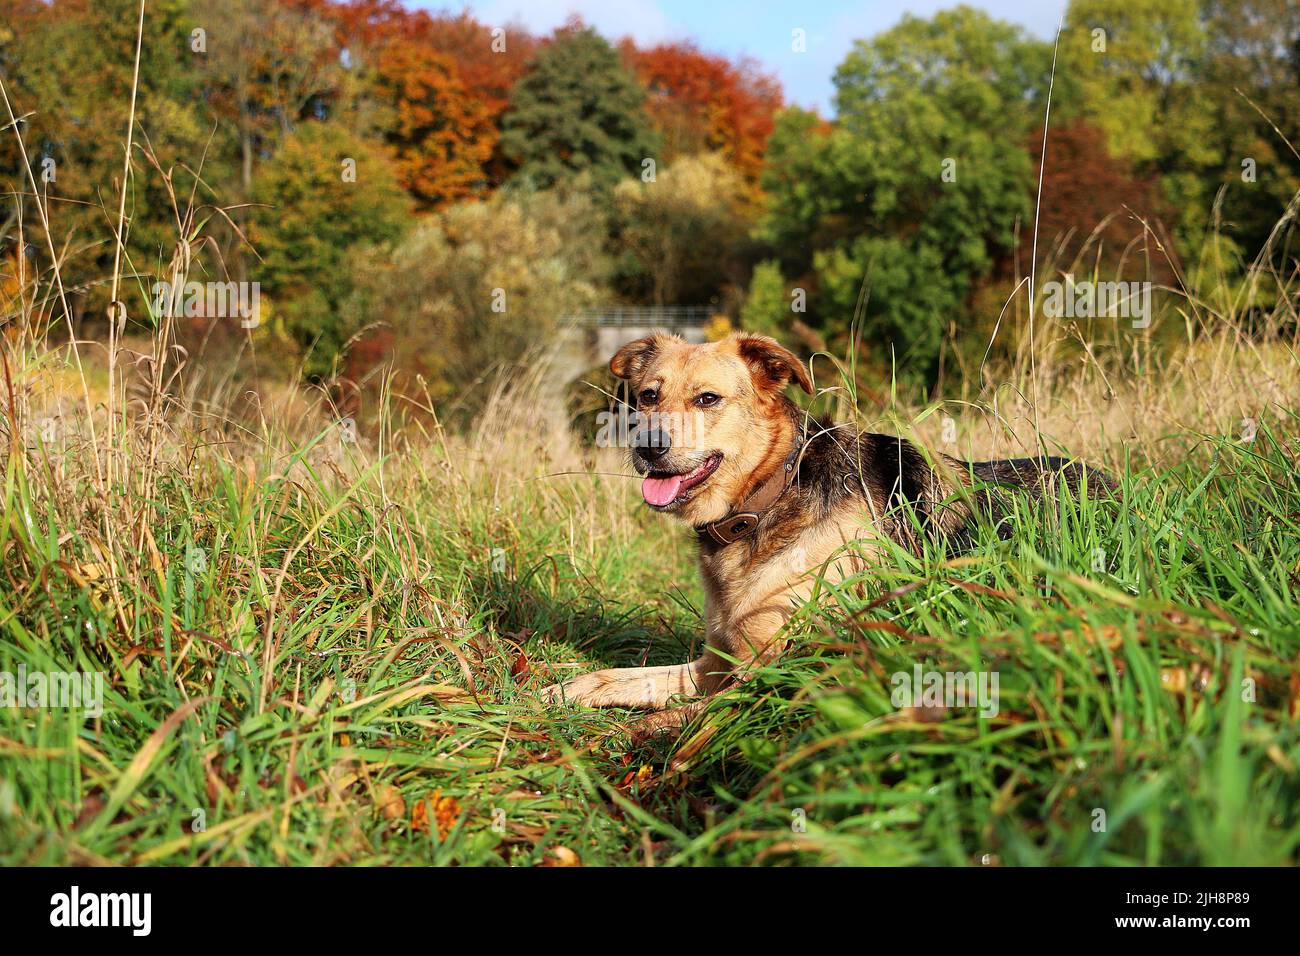 The Huntaway dog resting on the grass with trees in the background on an autumn day Stock Photo